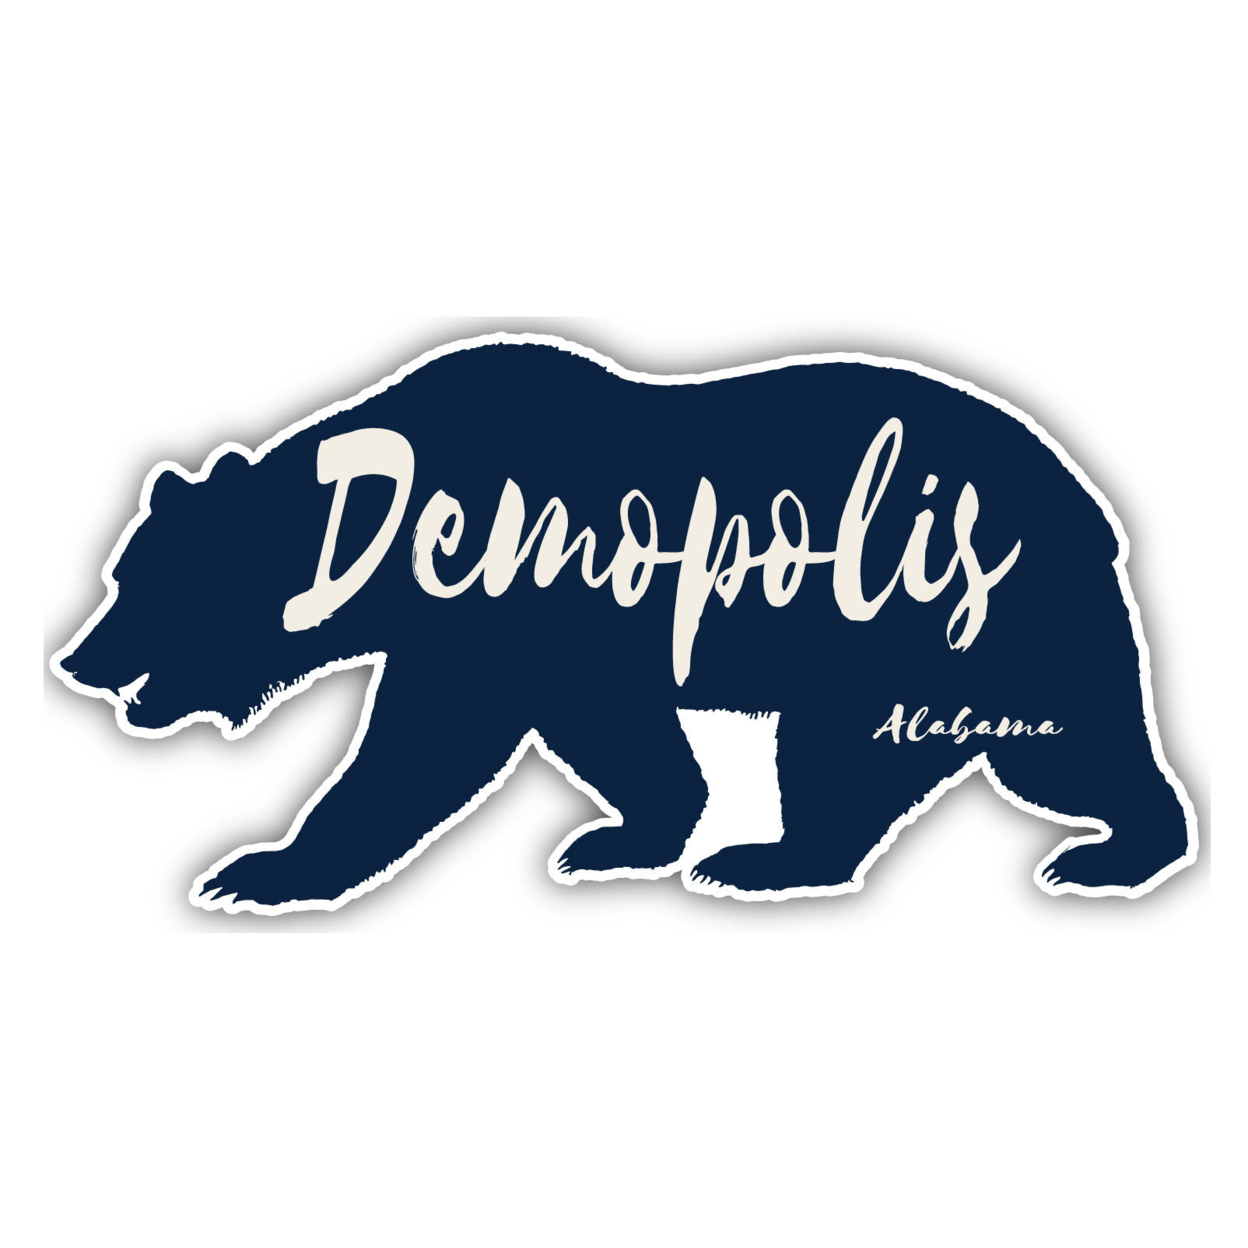 Demopolis Alabama Souvenir Decorative Stickers (Choose Theme And Size) - 4-Pack, 2-Inch, Great Outdoors